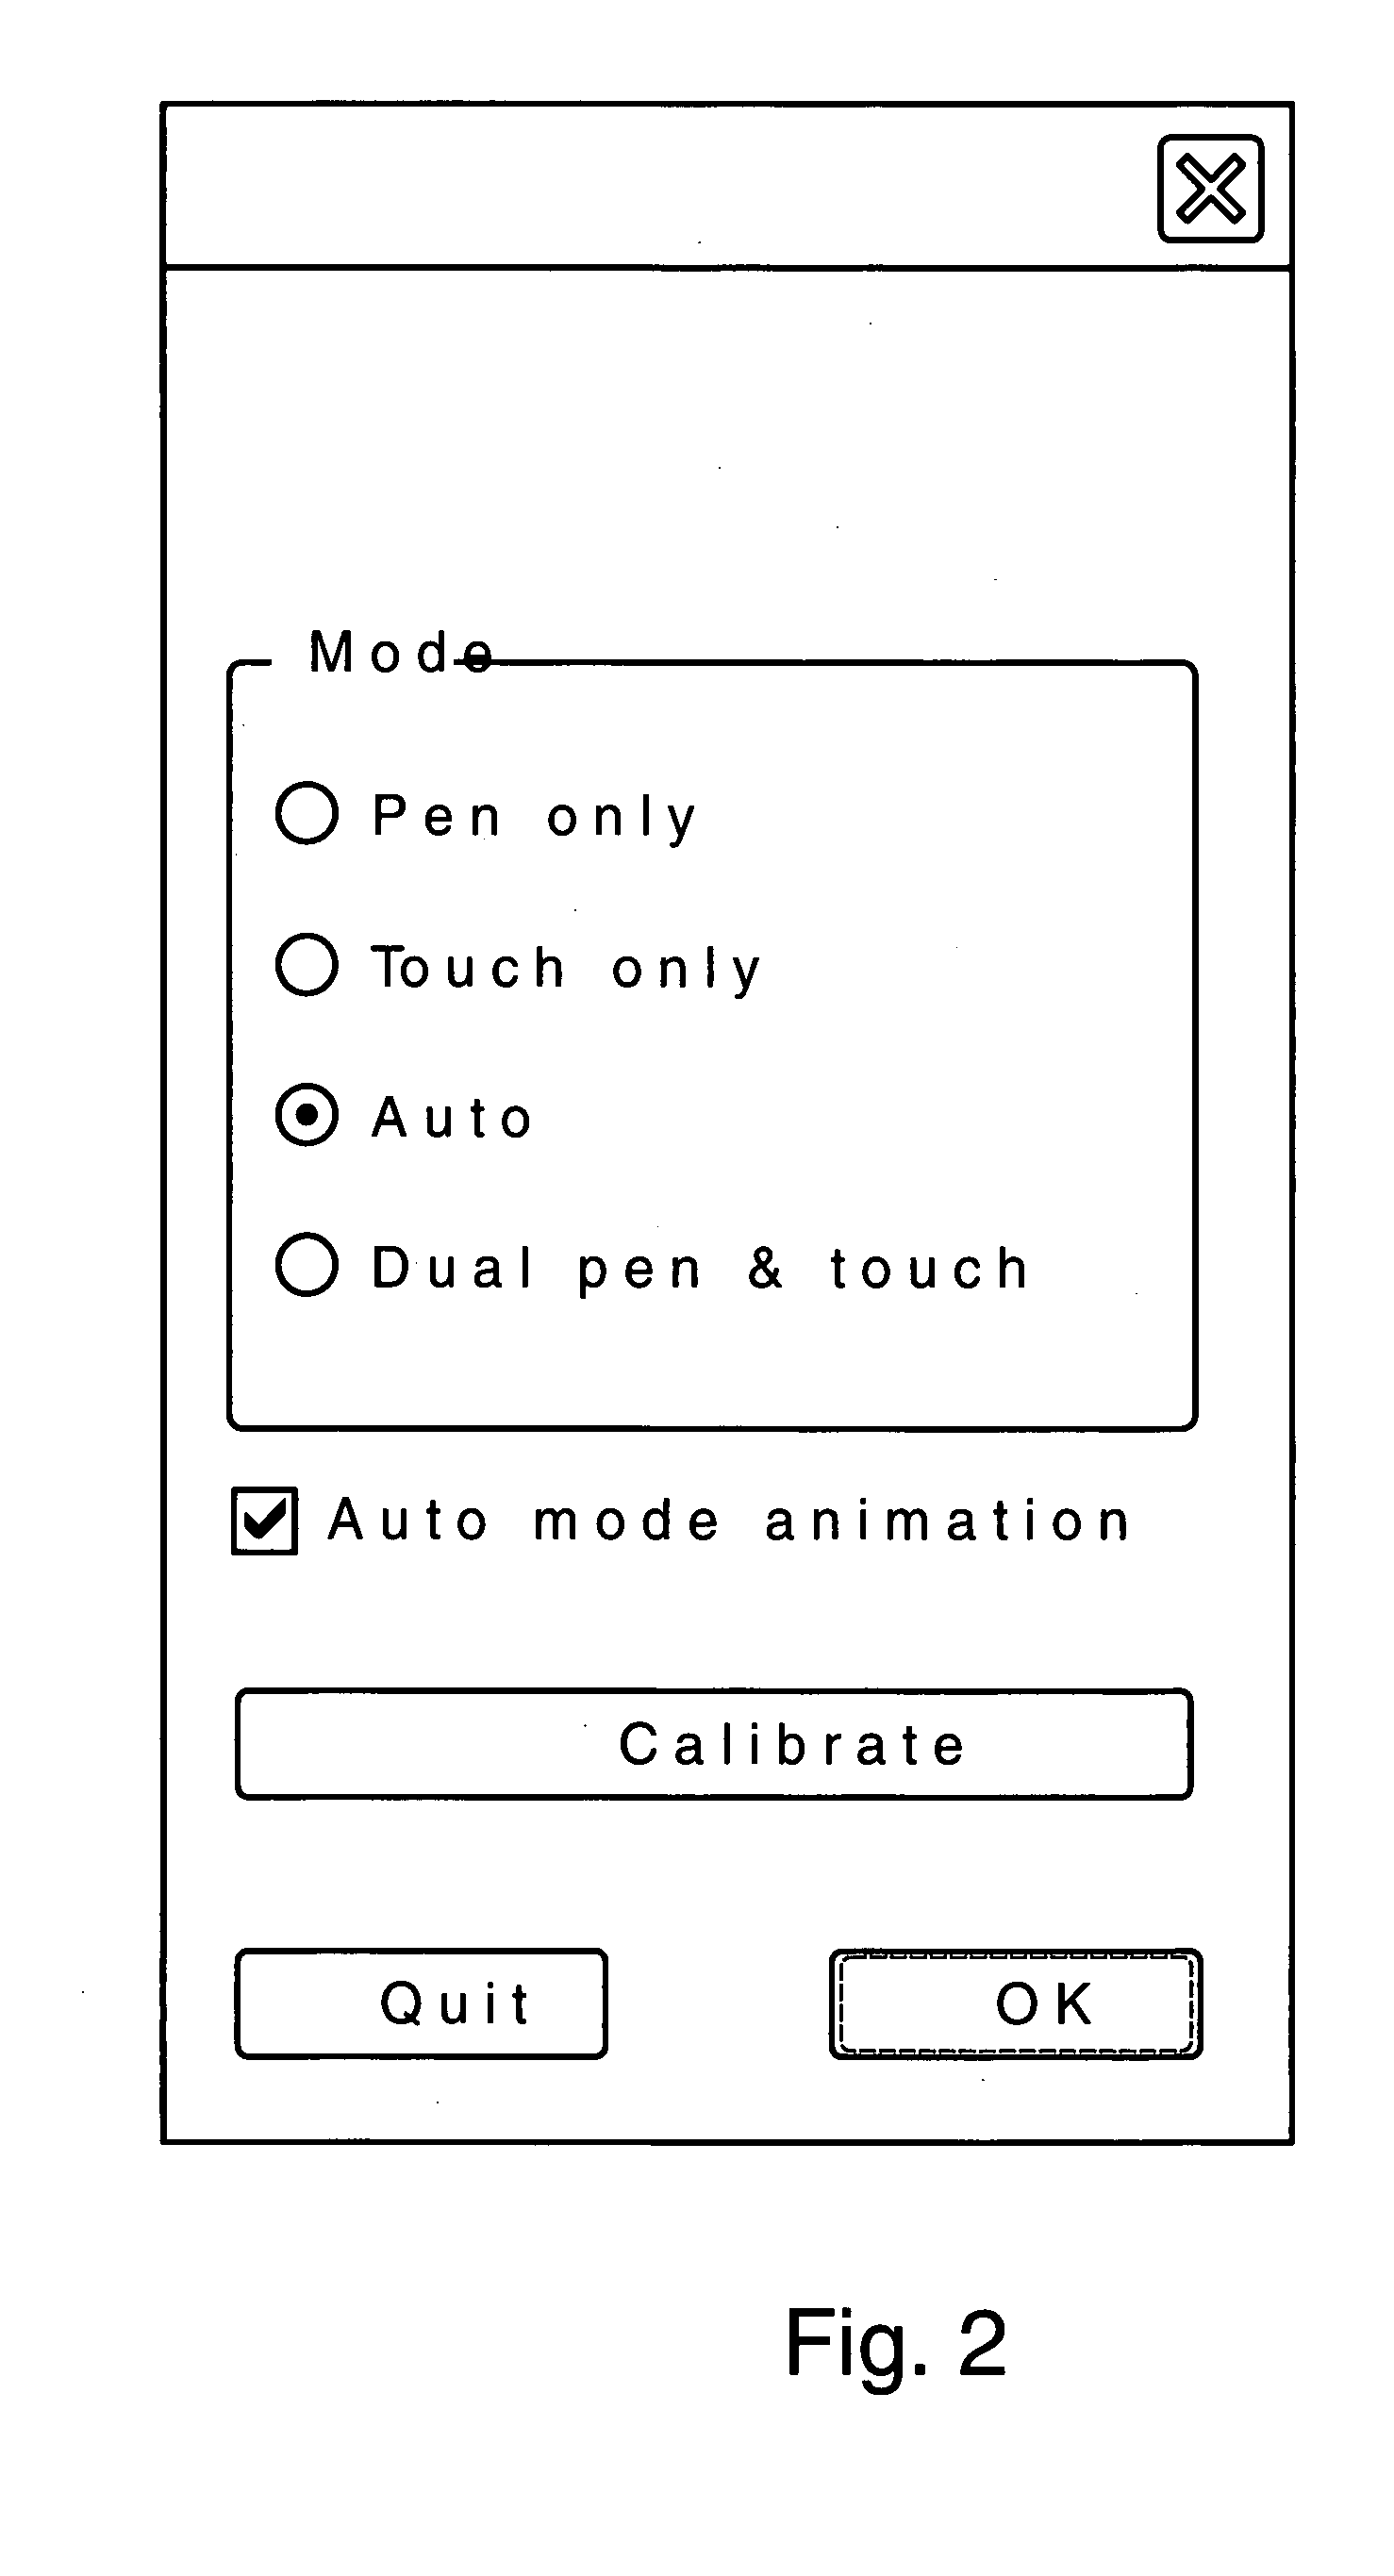 Gesture recognition feedback for a dual mode digitizer